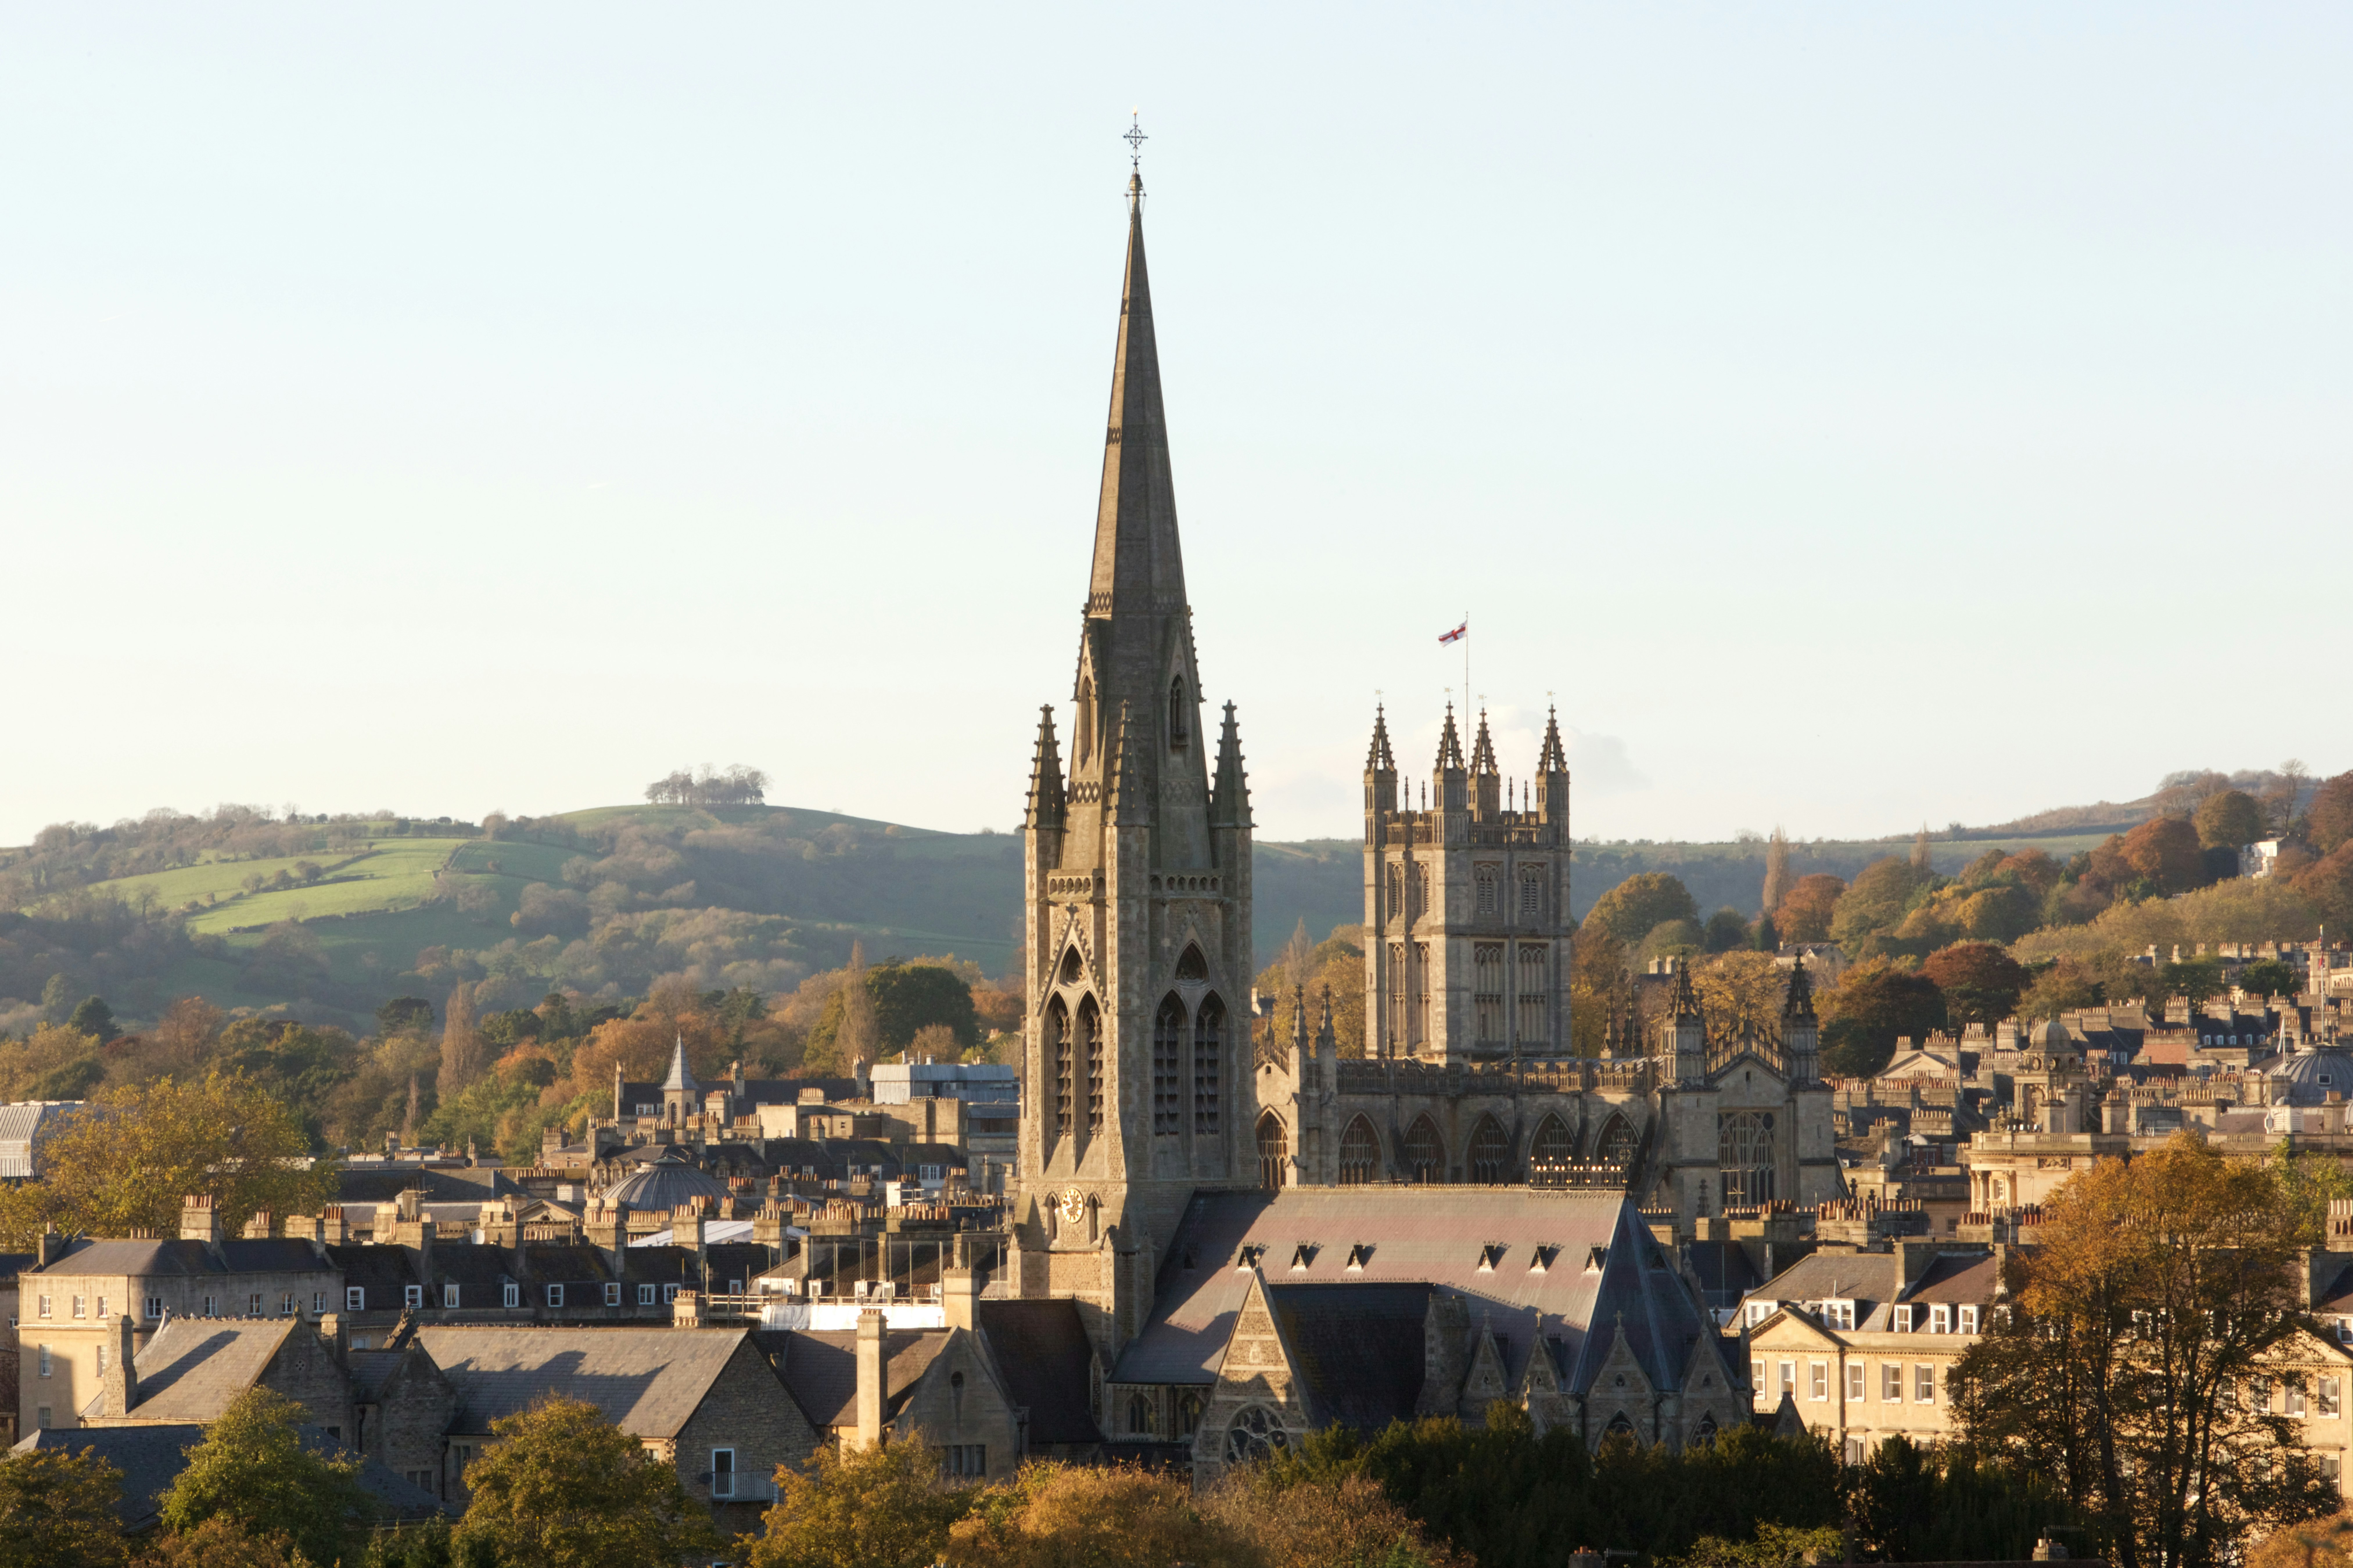 The skyline of Bath, England. A large church juts out from a cluster of Georgian-style buildings. 